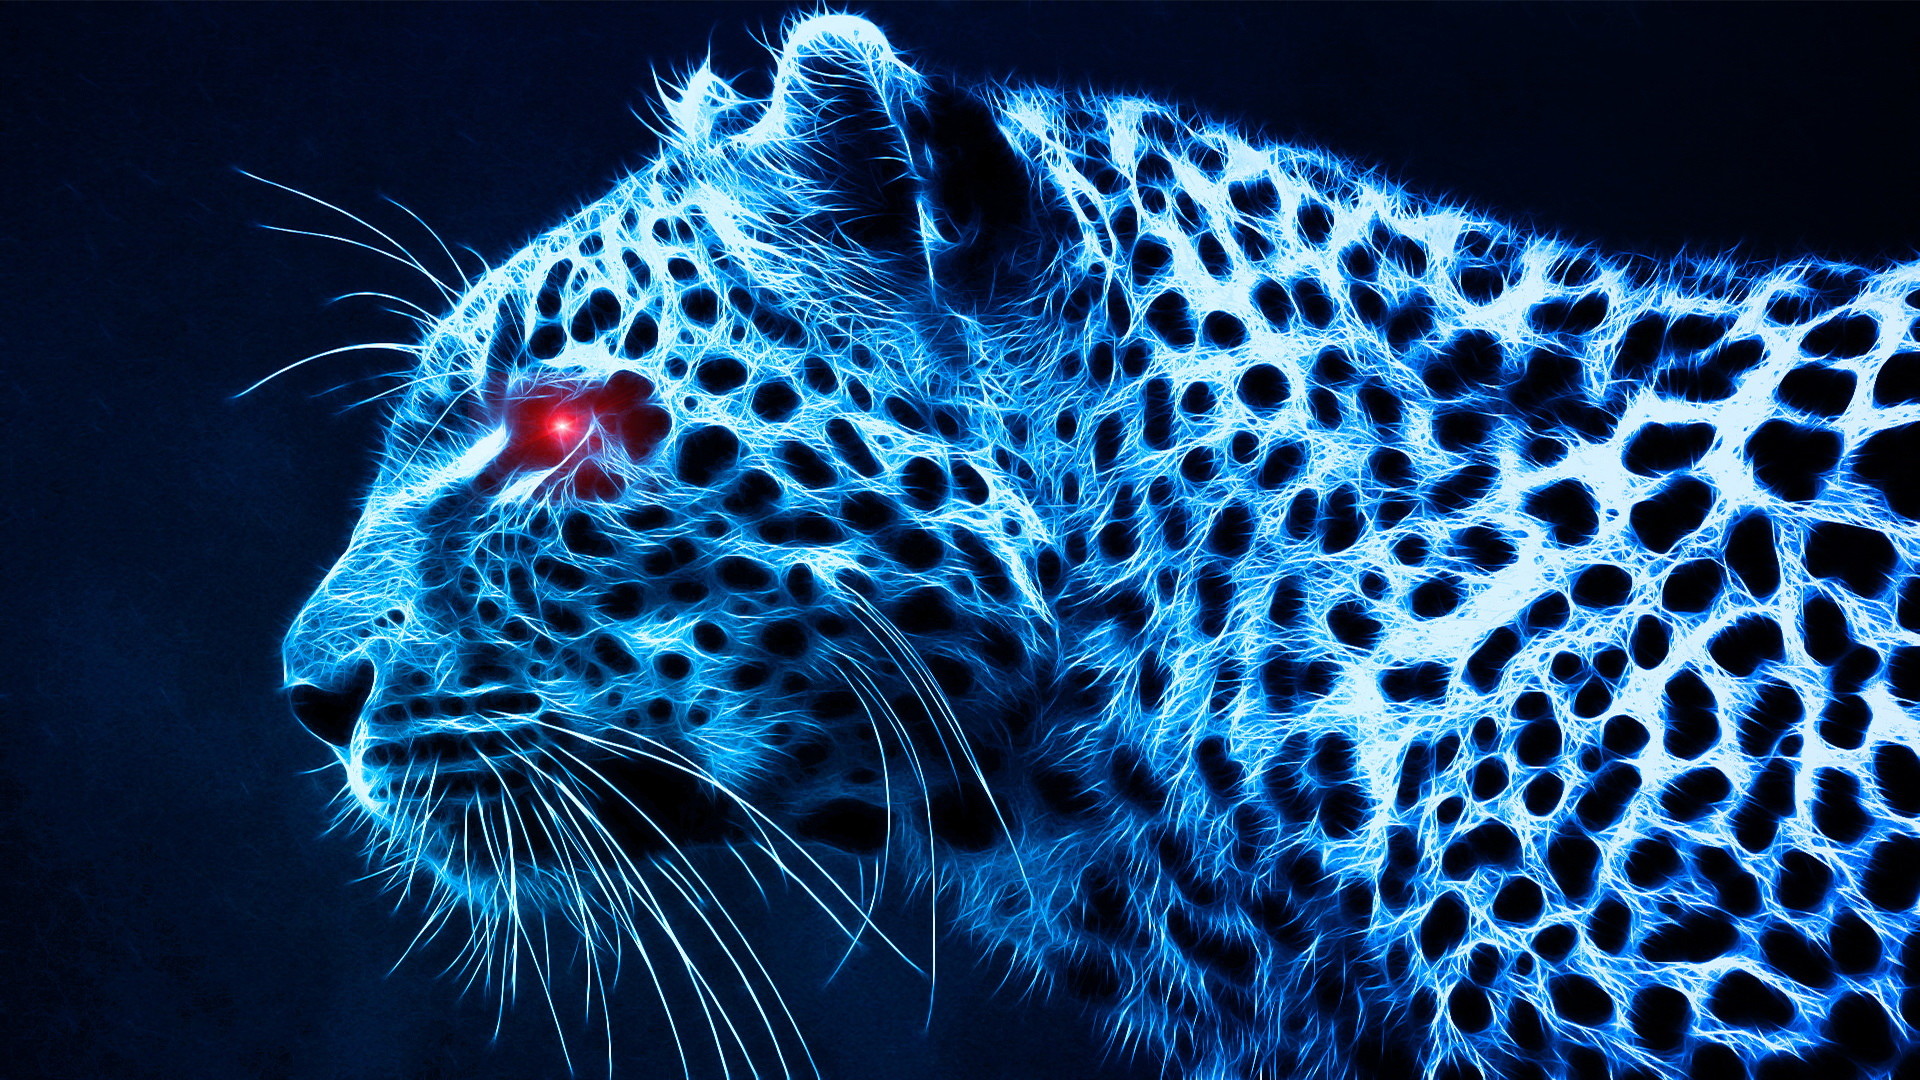 1920x1080 WallpapersCastle.com | Cheetah Wallpapers Free Download | Page 1